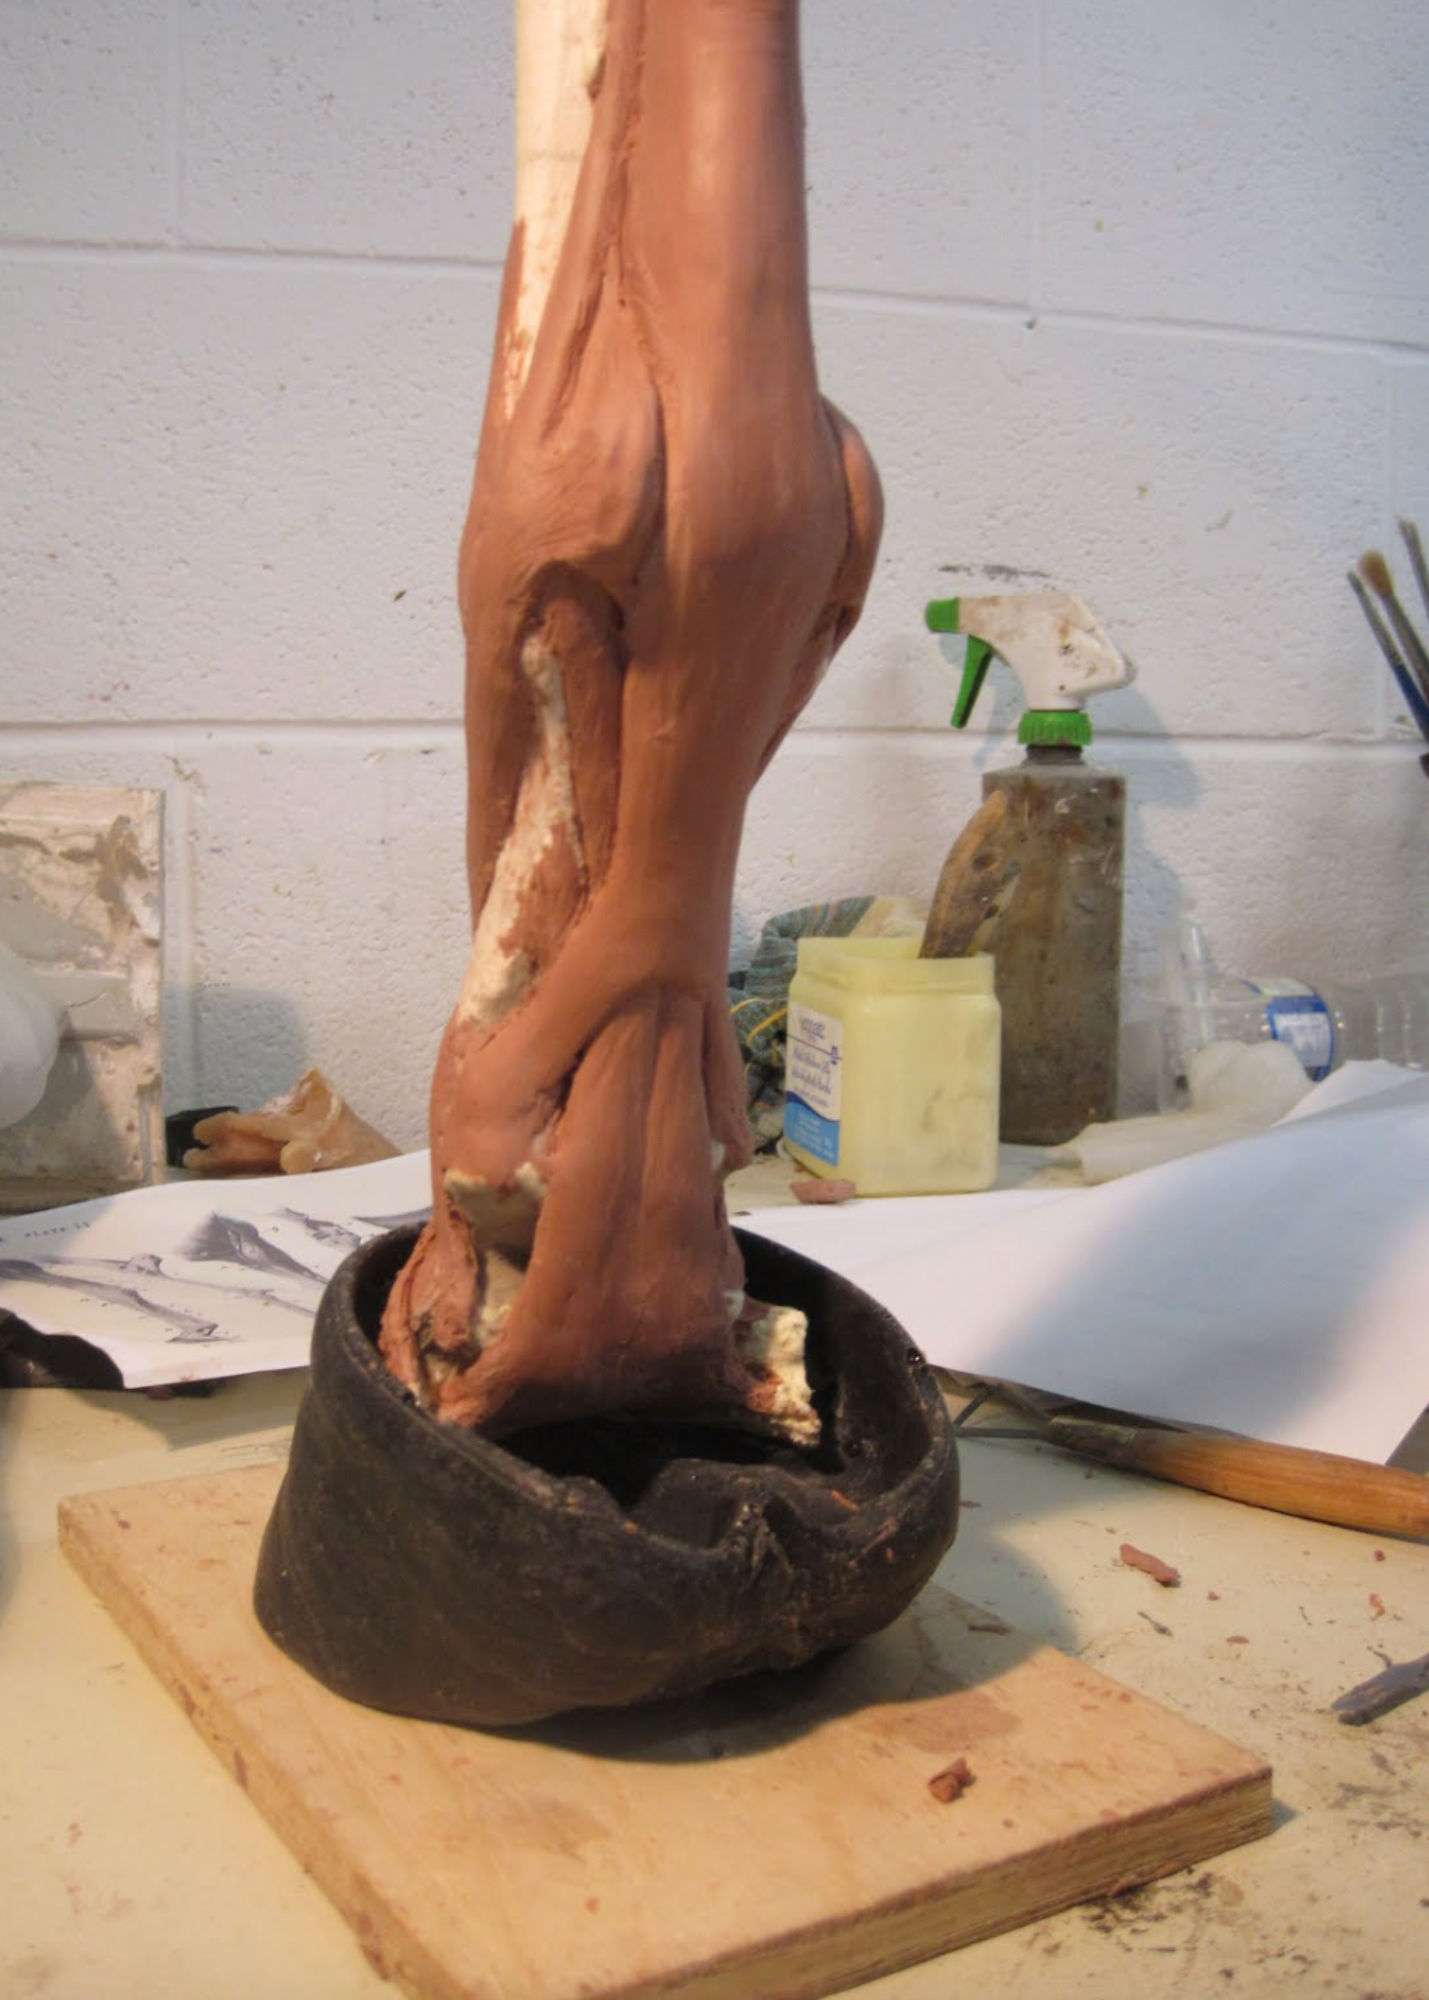  This photo shows the early stages of the ligament and tendon structures of the equine leg. As we progress with the sculpting process, accuracy is ensured with frequent consultations from the UCVM faculty. 